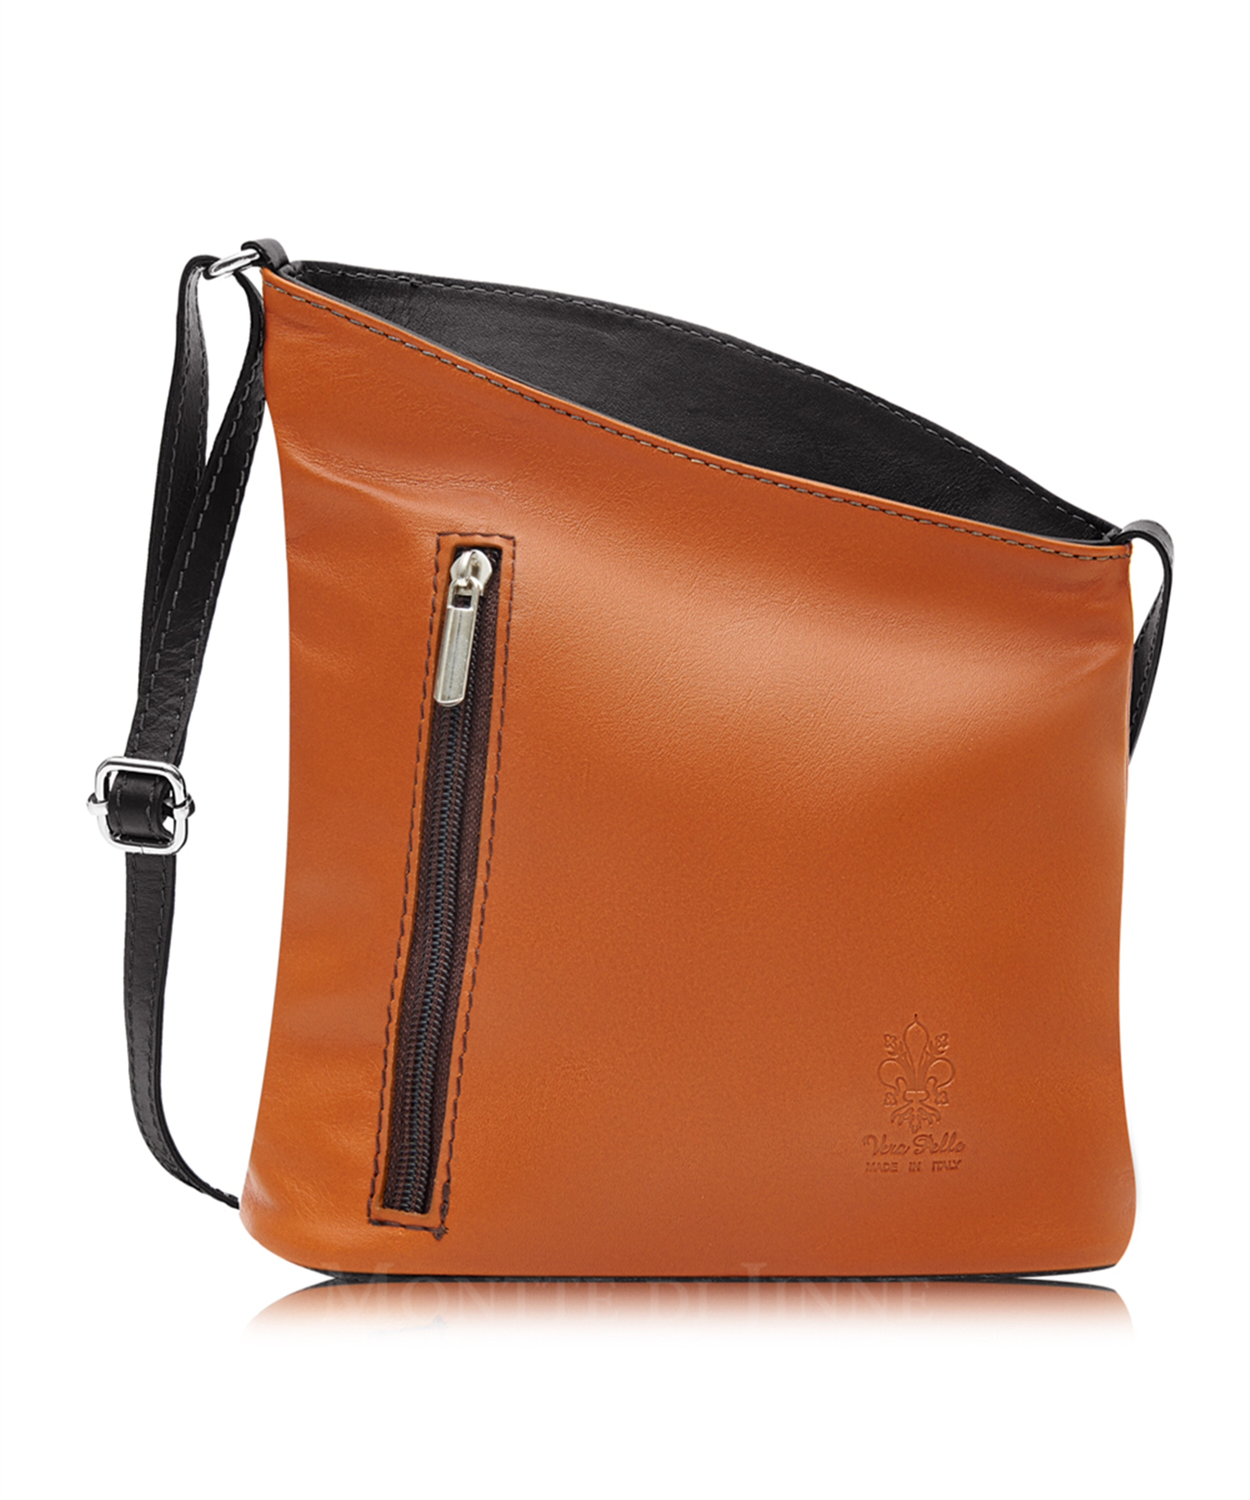 Tan With Chocolate Trim Soft Leather Angled Shoulder Bag 